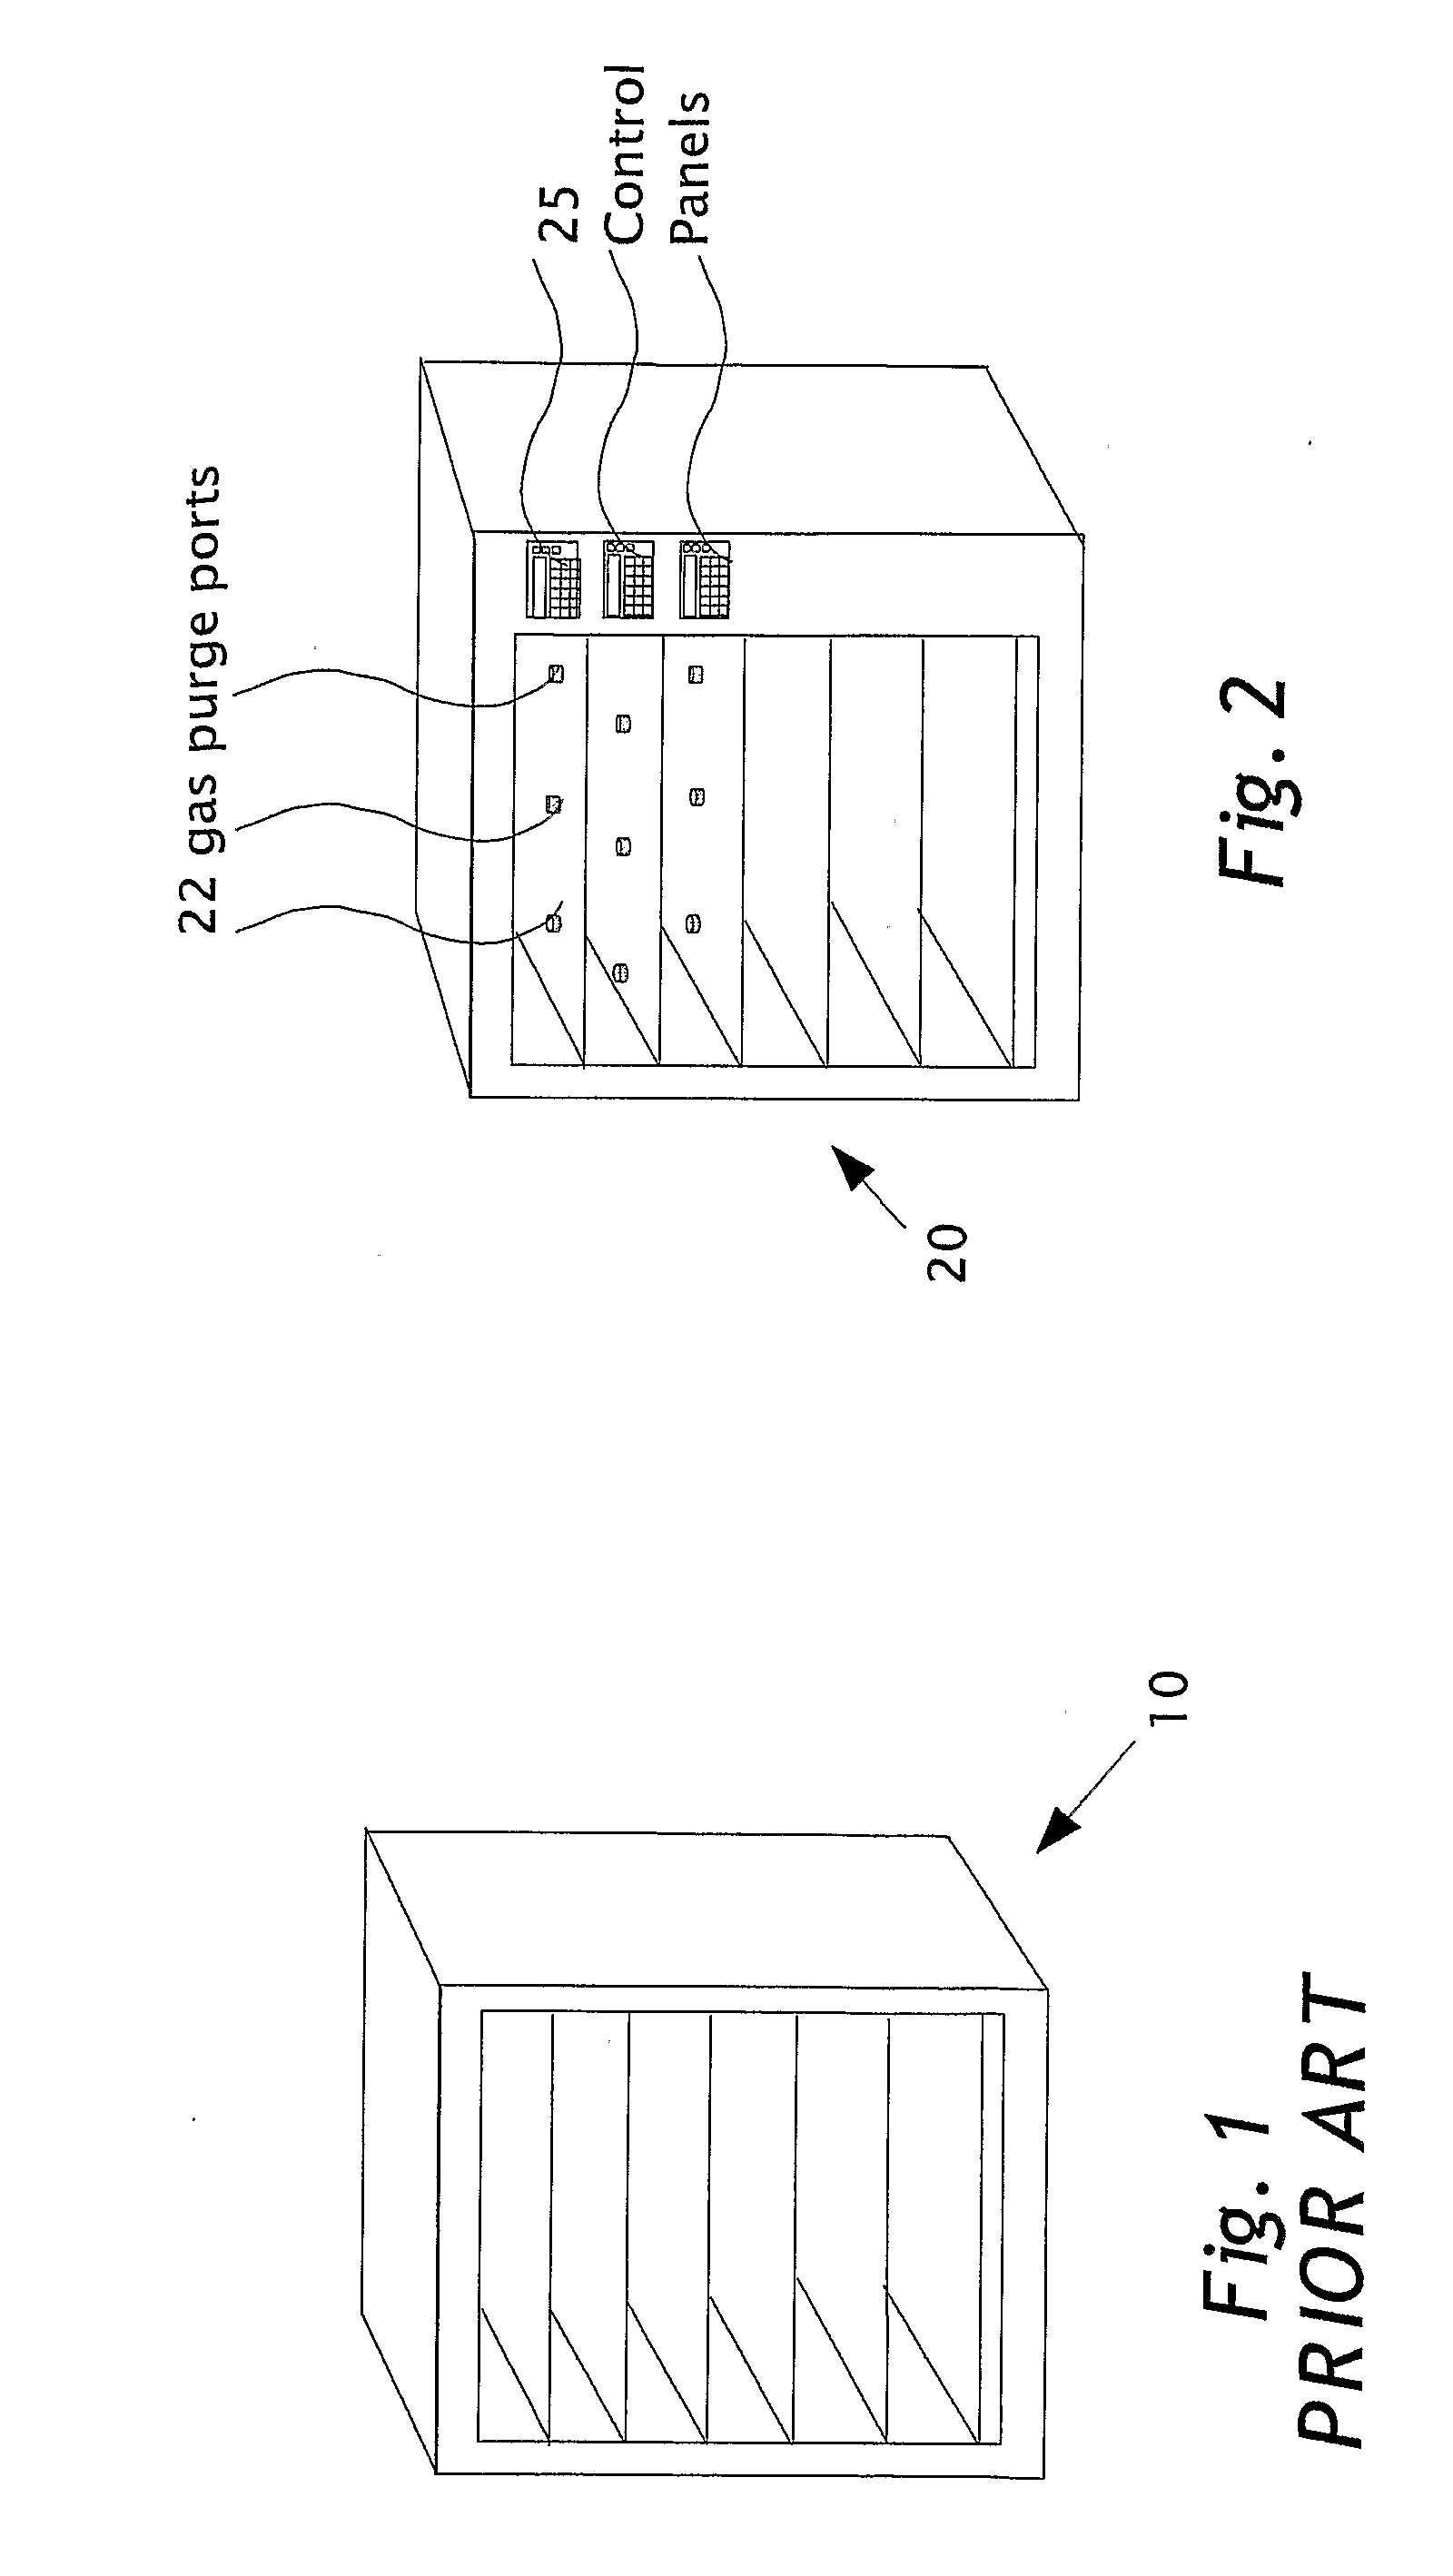 Storage and purge system for semiconductor wafers